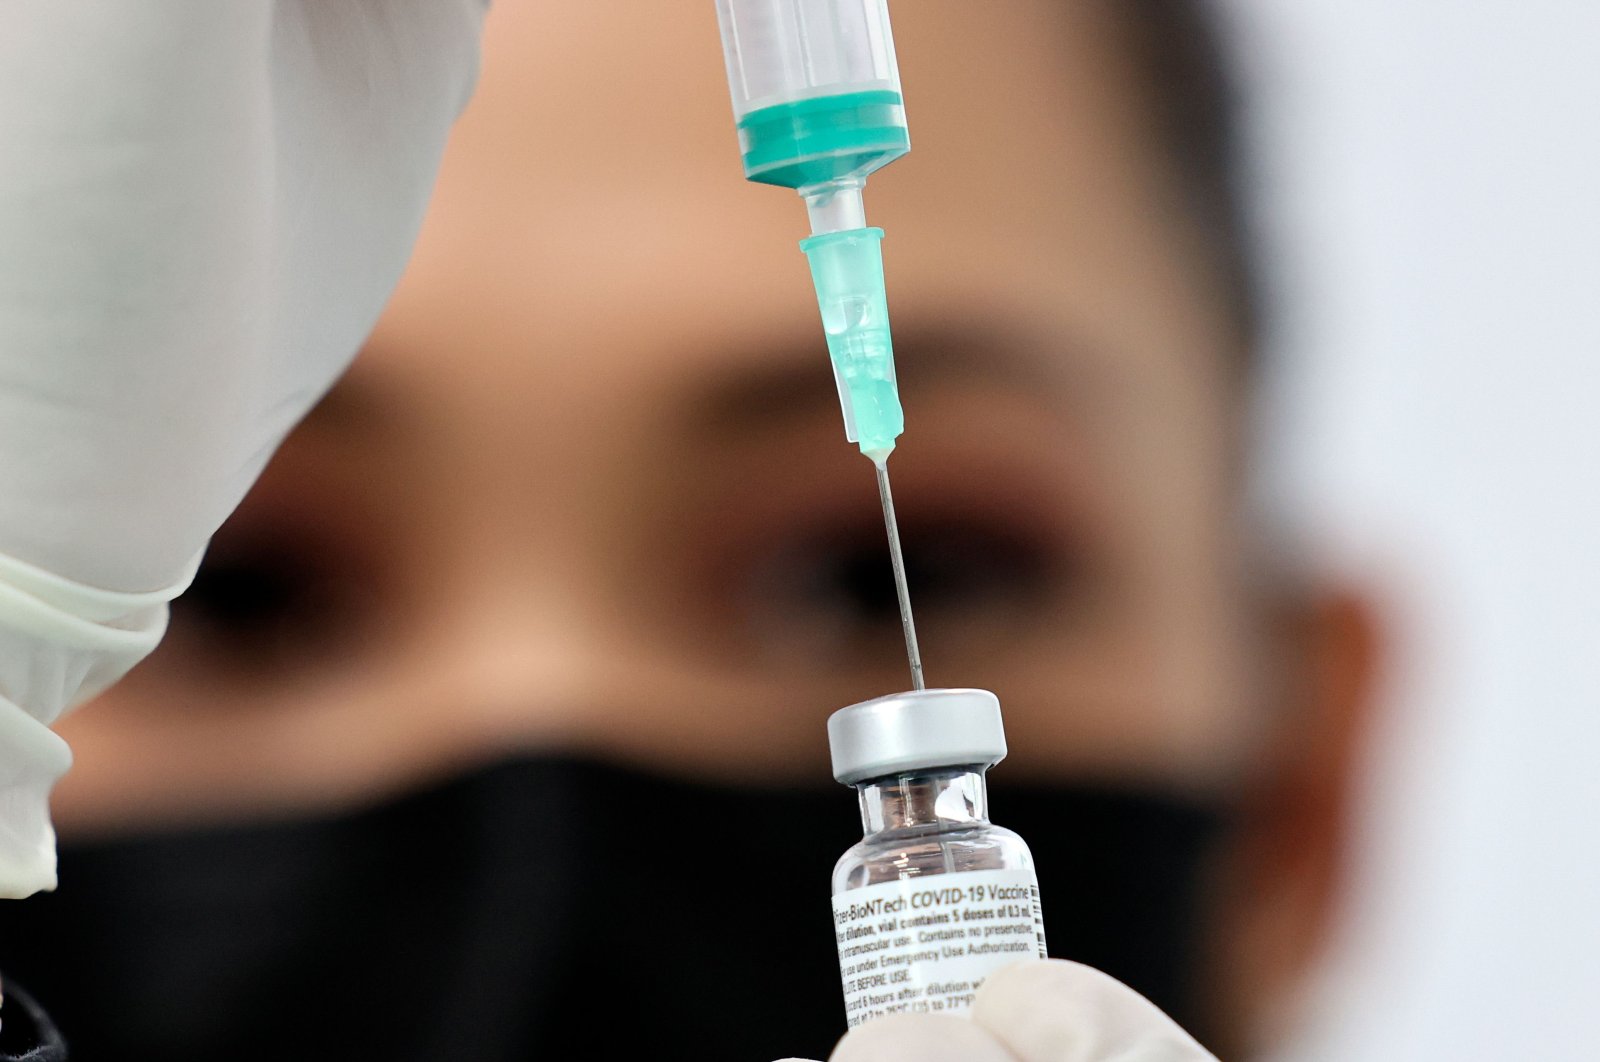 A health worker prepares an injection of the Pfizer-BioNTech vaccine against the coronavirus at a vaccination center, set up at the Dubai International Financial Center in the Gulf emirate of Dubai, on Feb. 3, 2021. (AFP Photo)